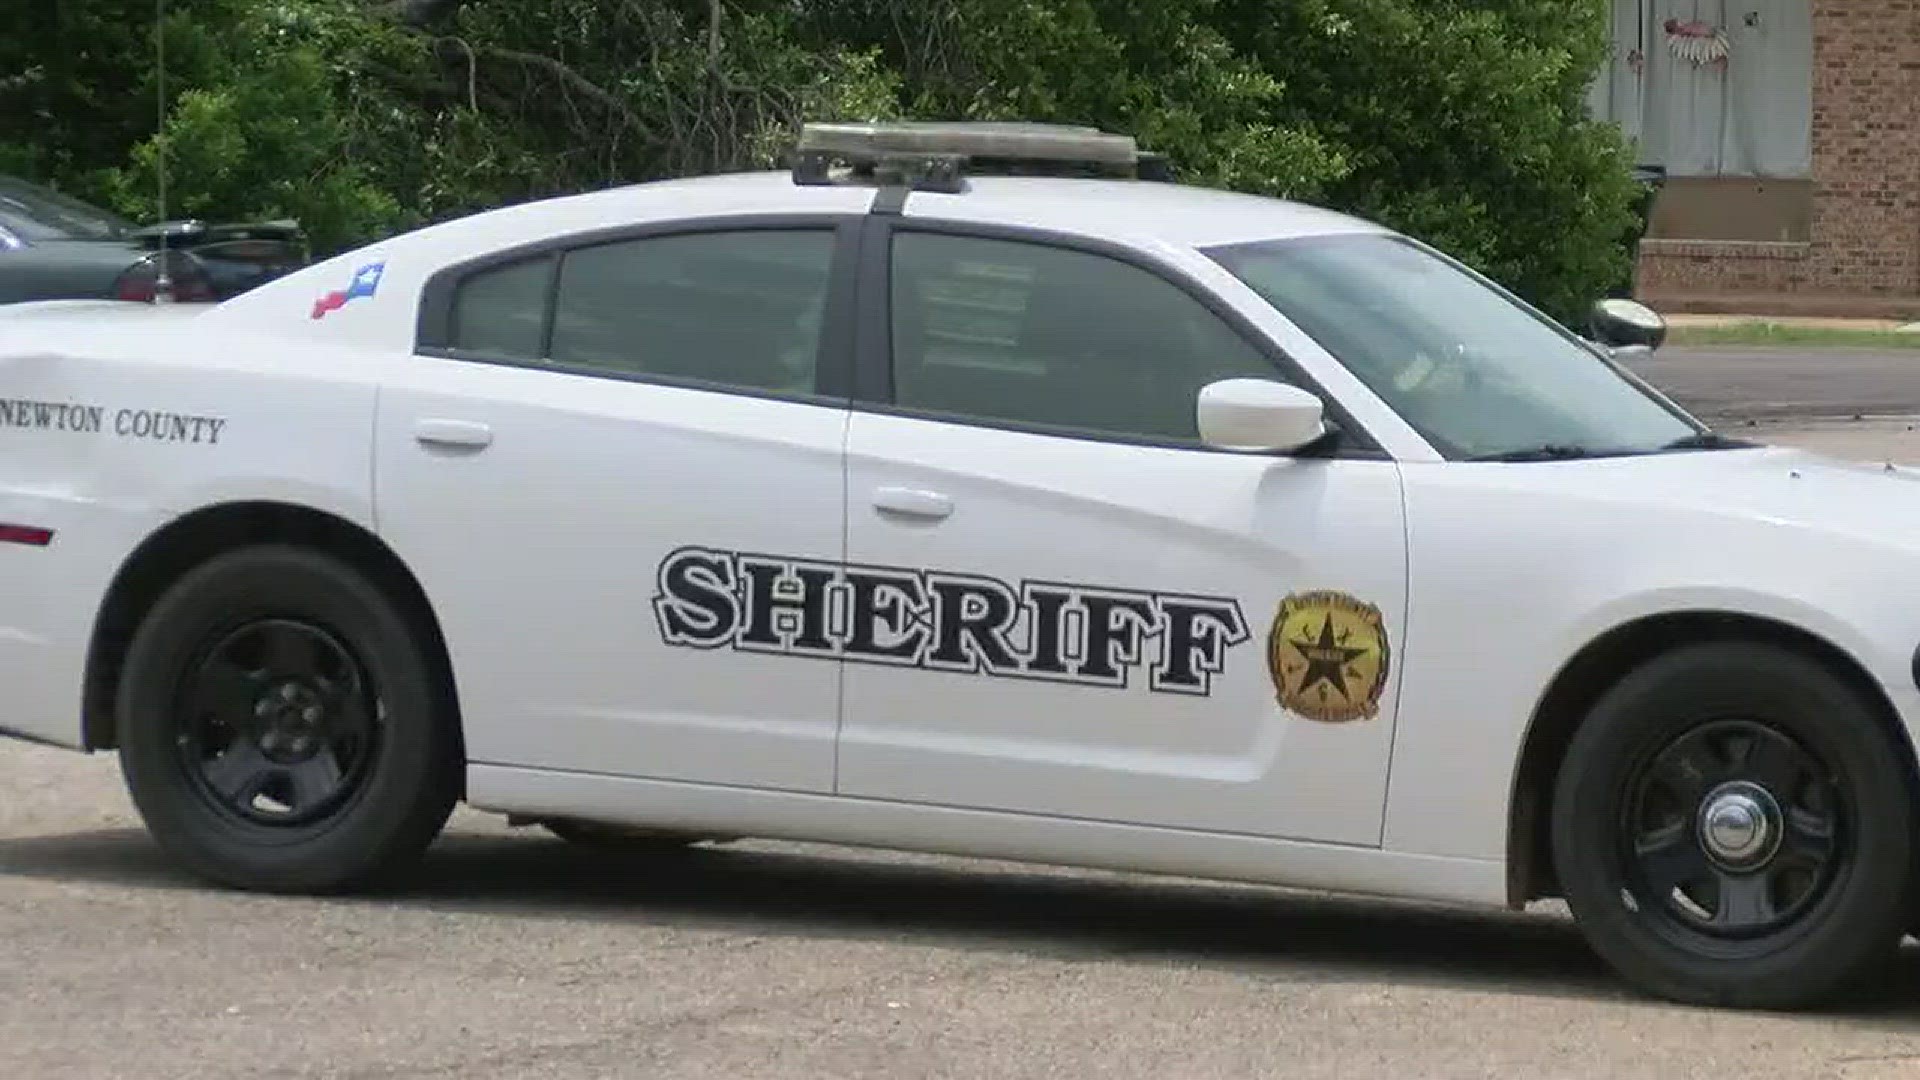 An East Texas sheriff believes his predecessor may be to blame for the destruction of evidence in several active criminal cases.